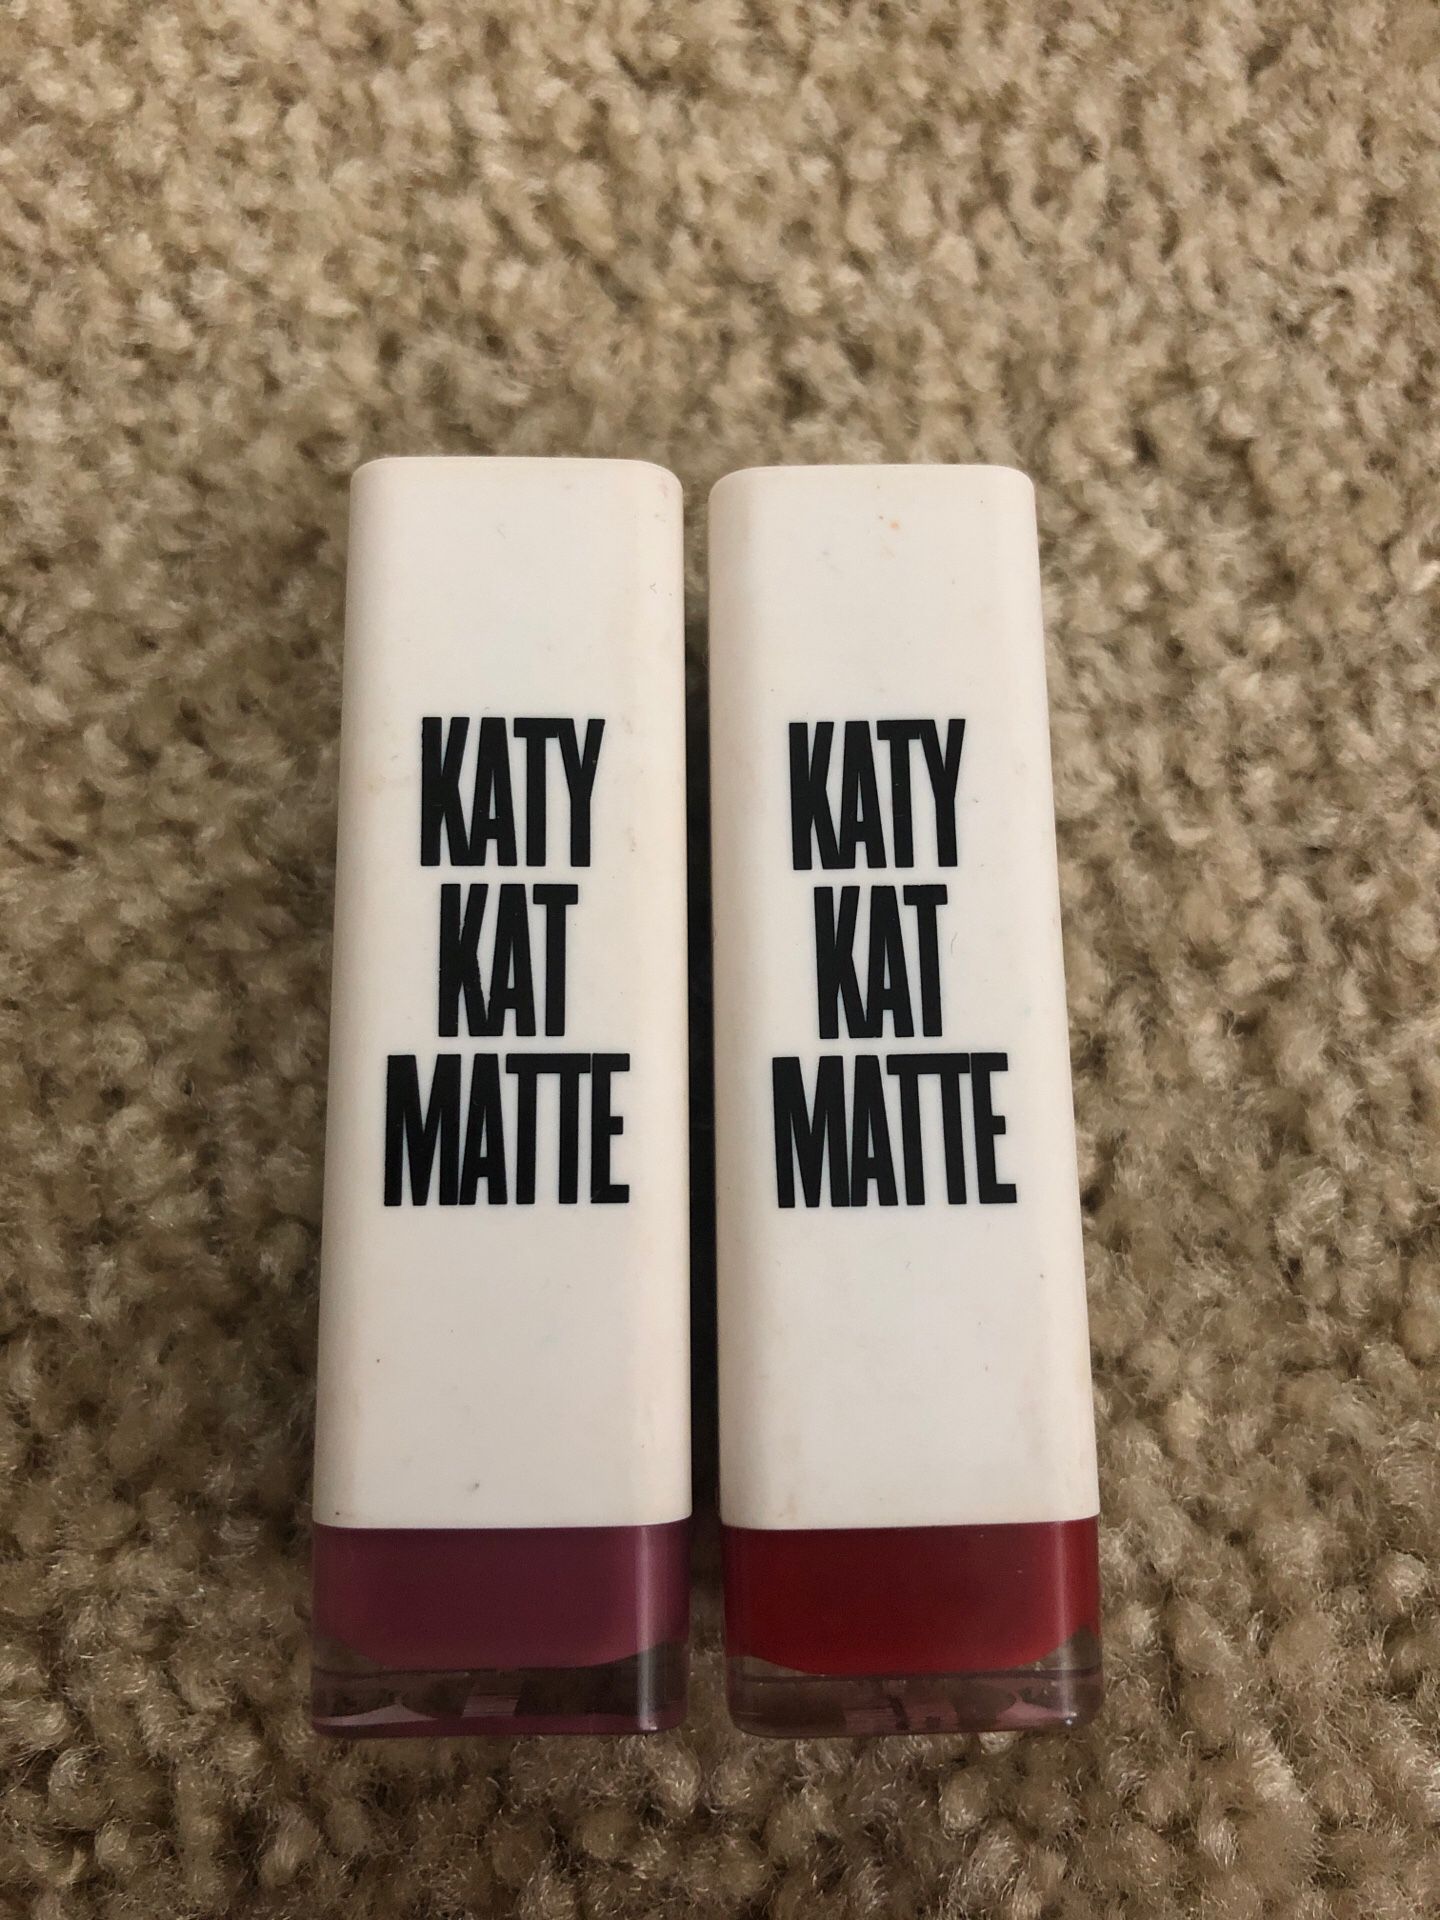 Katy Perry , Covergirl - Matte Lipsticks in Red and Pinkish shade